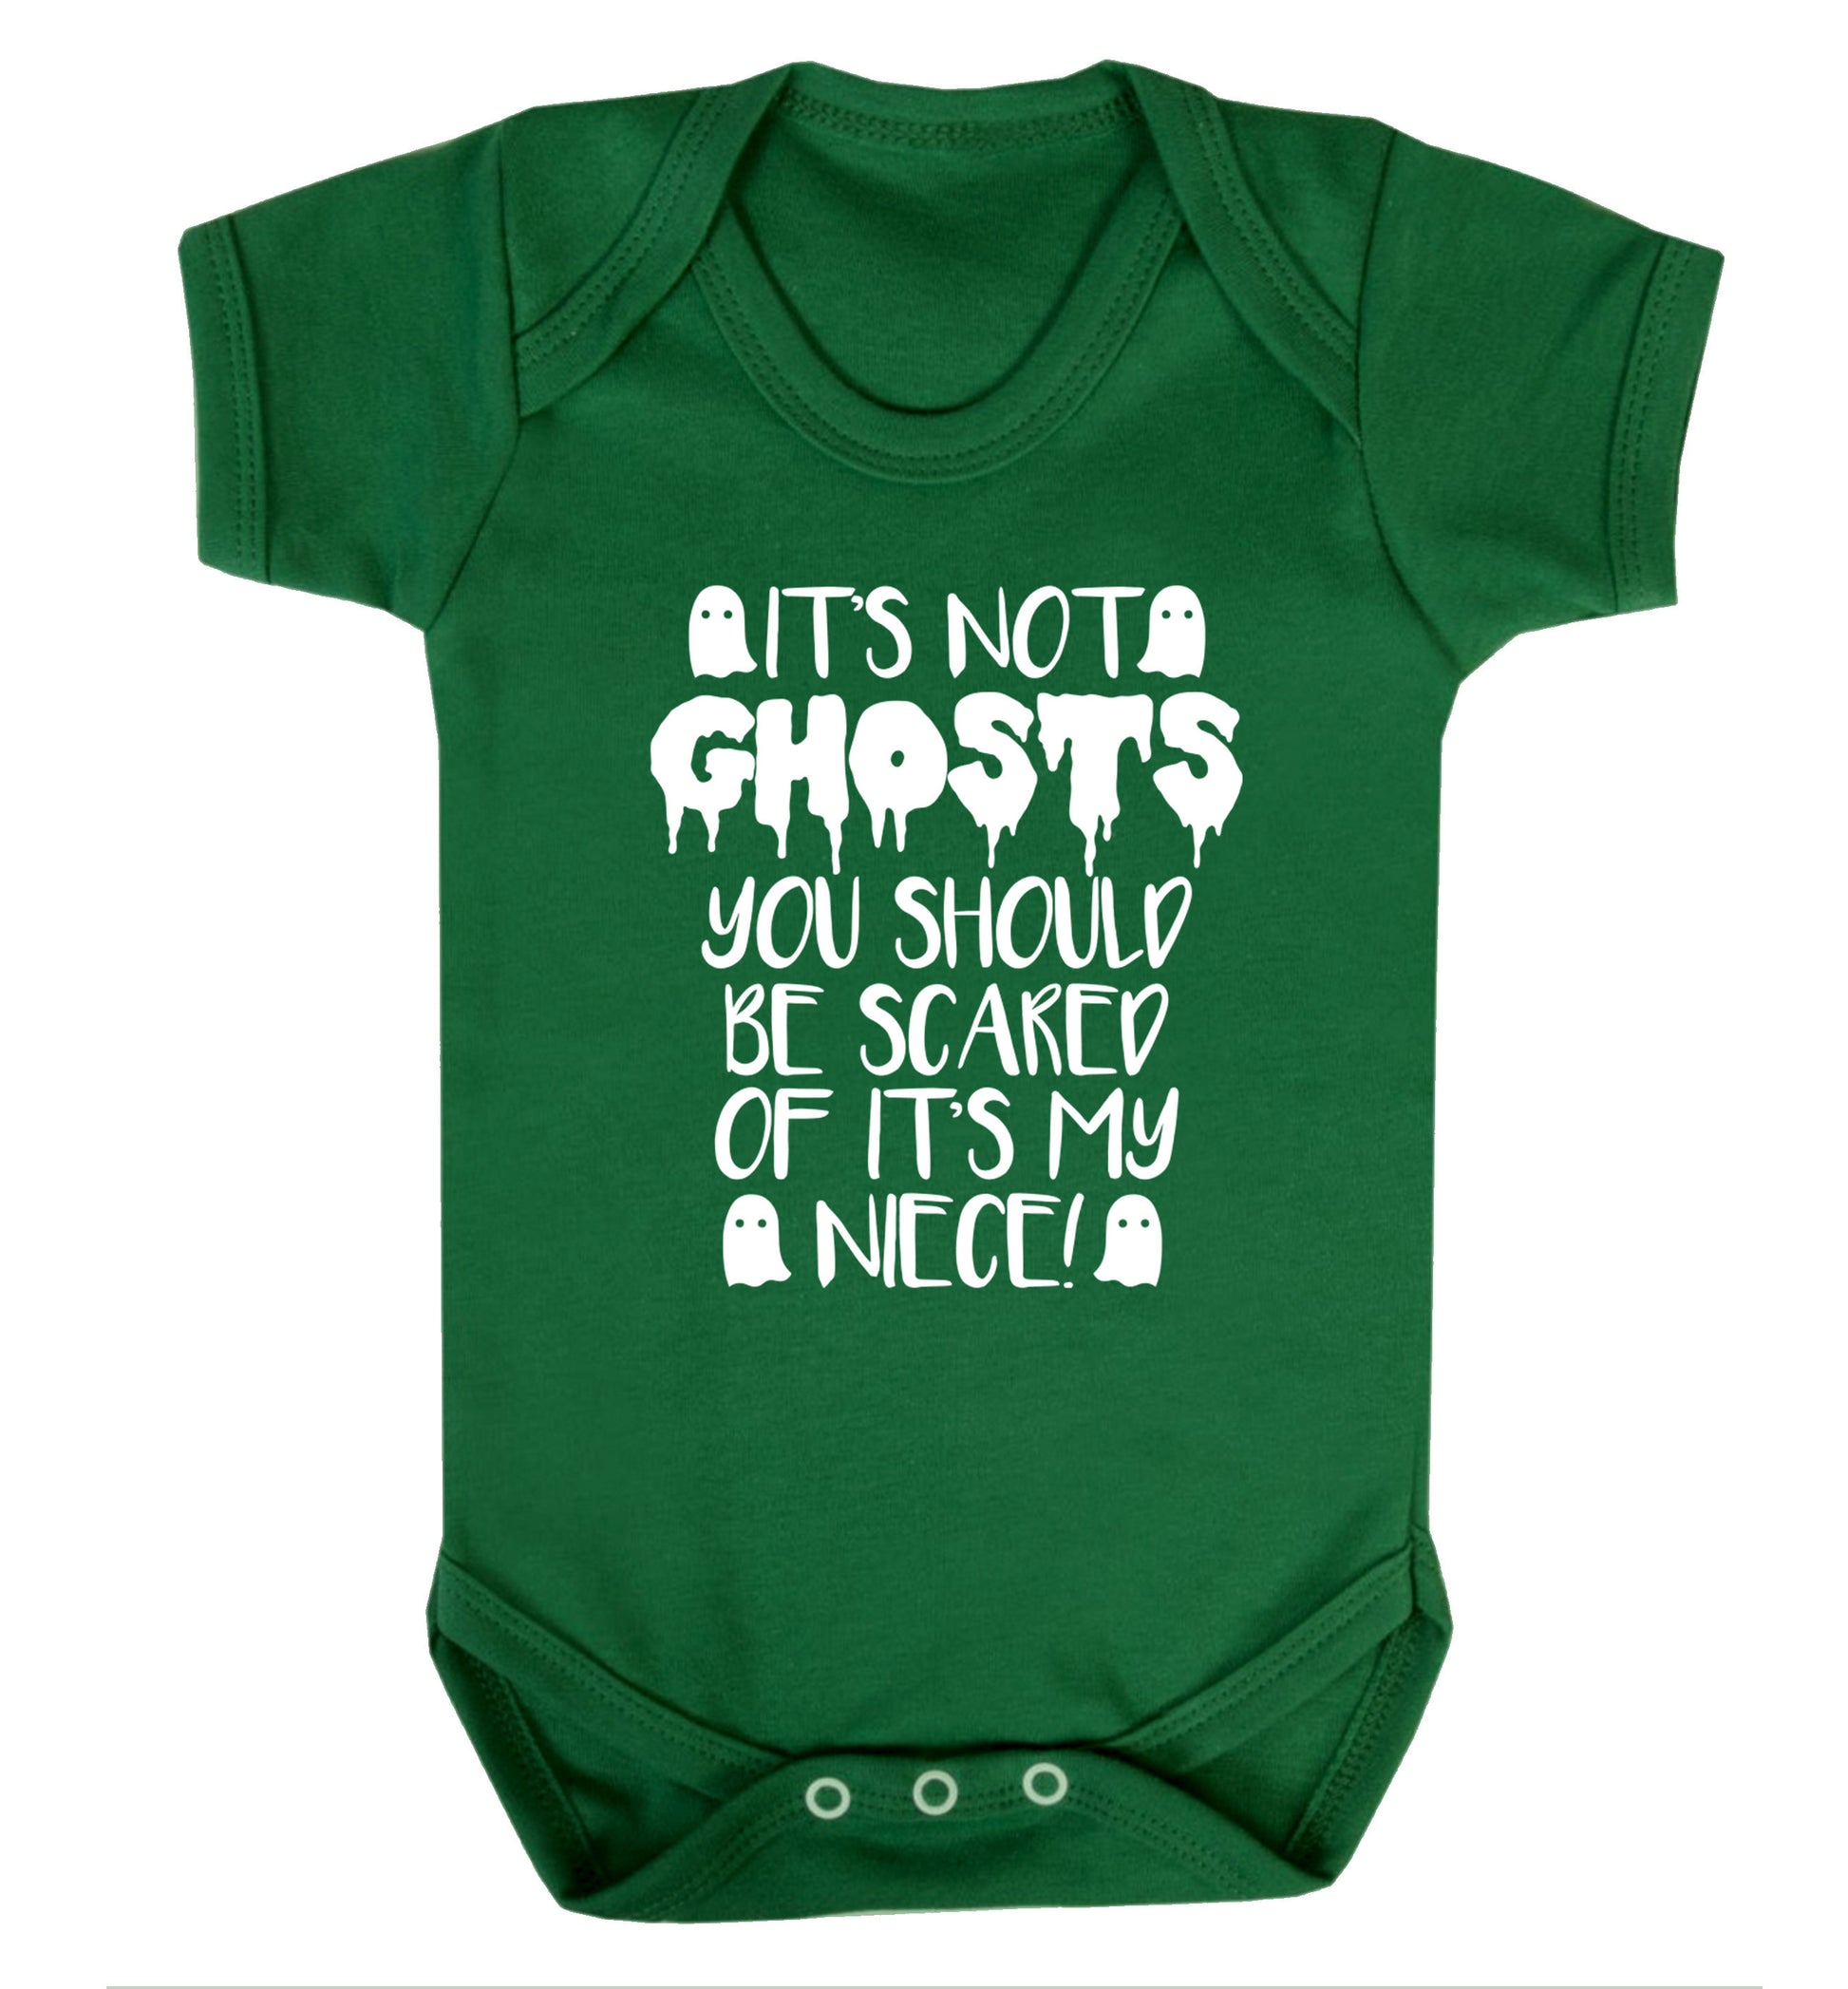 It's not ghosts you should be scared of it's my niece! Baby Vest green 18-24 months